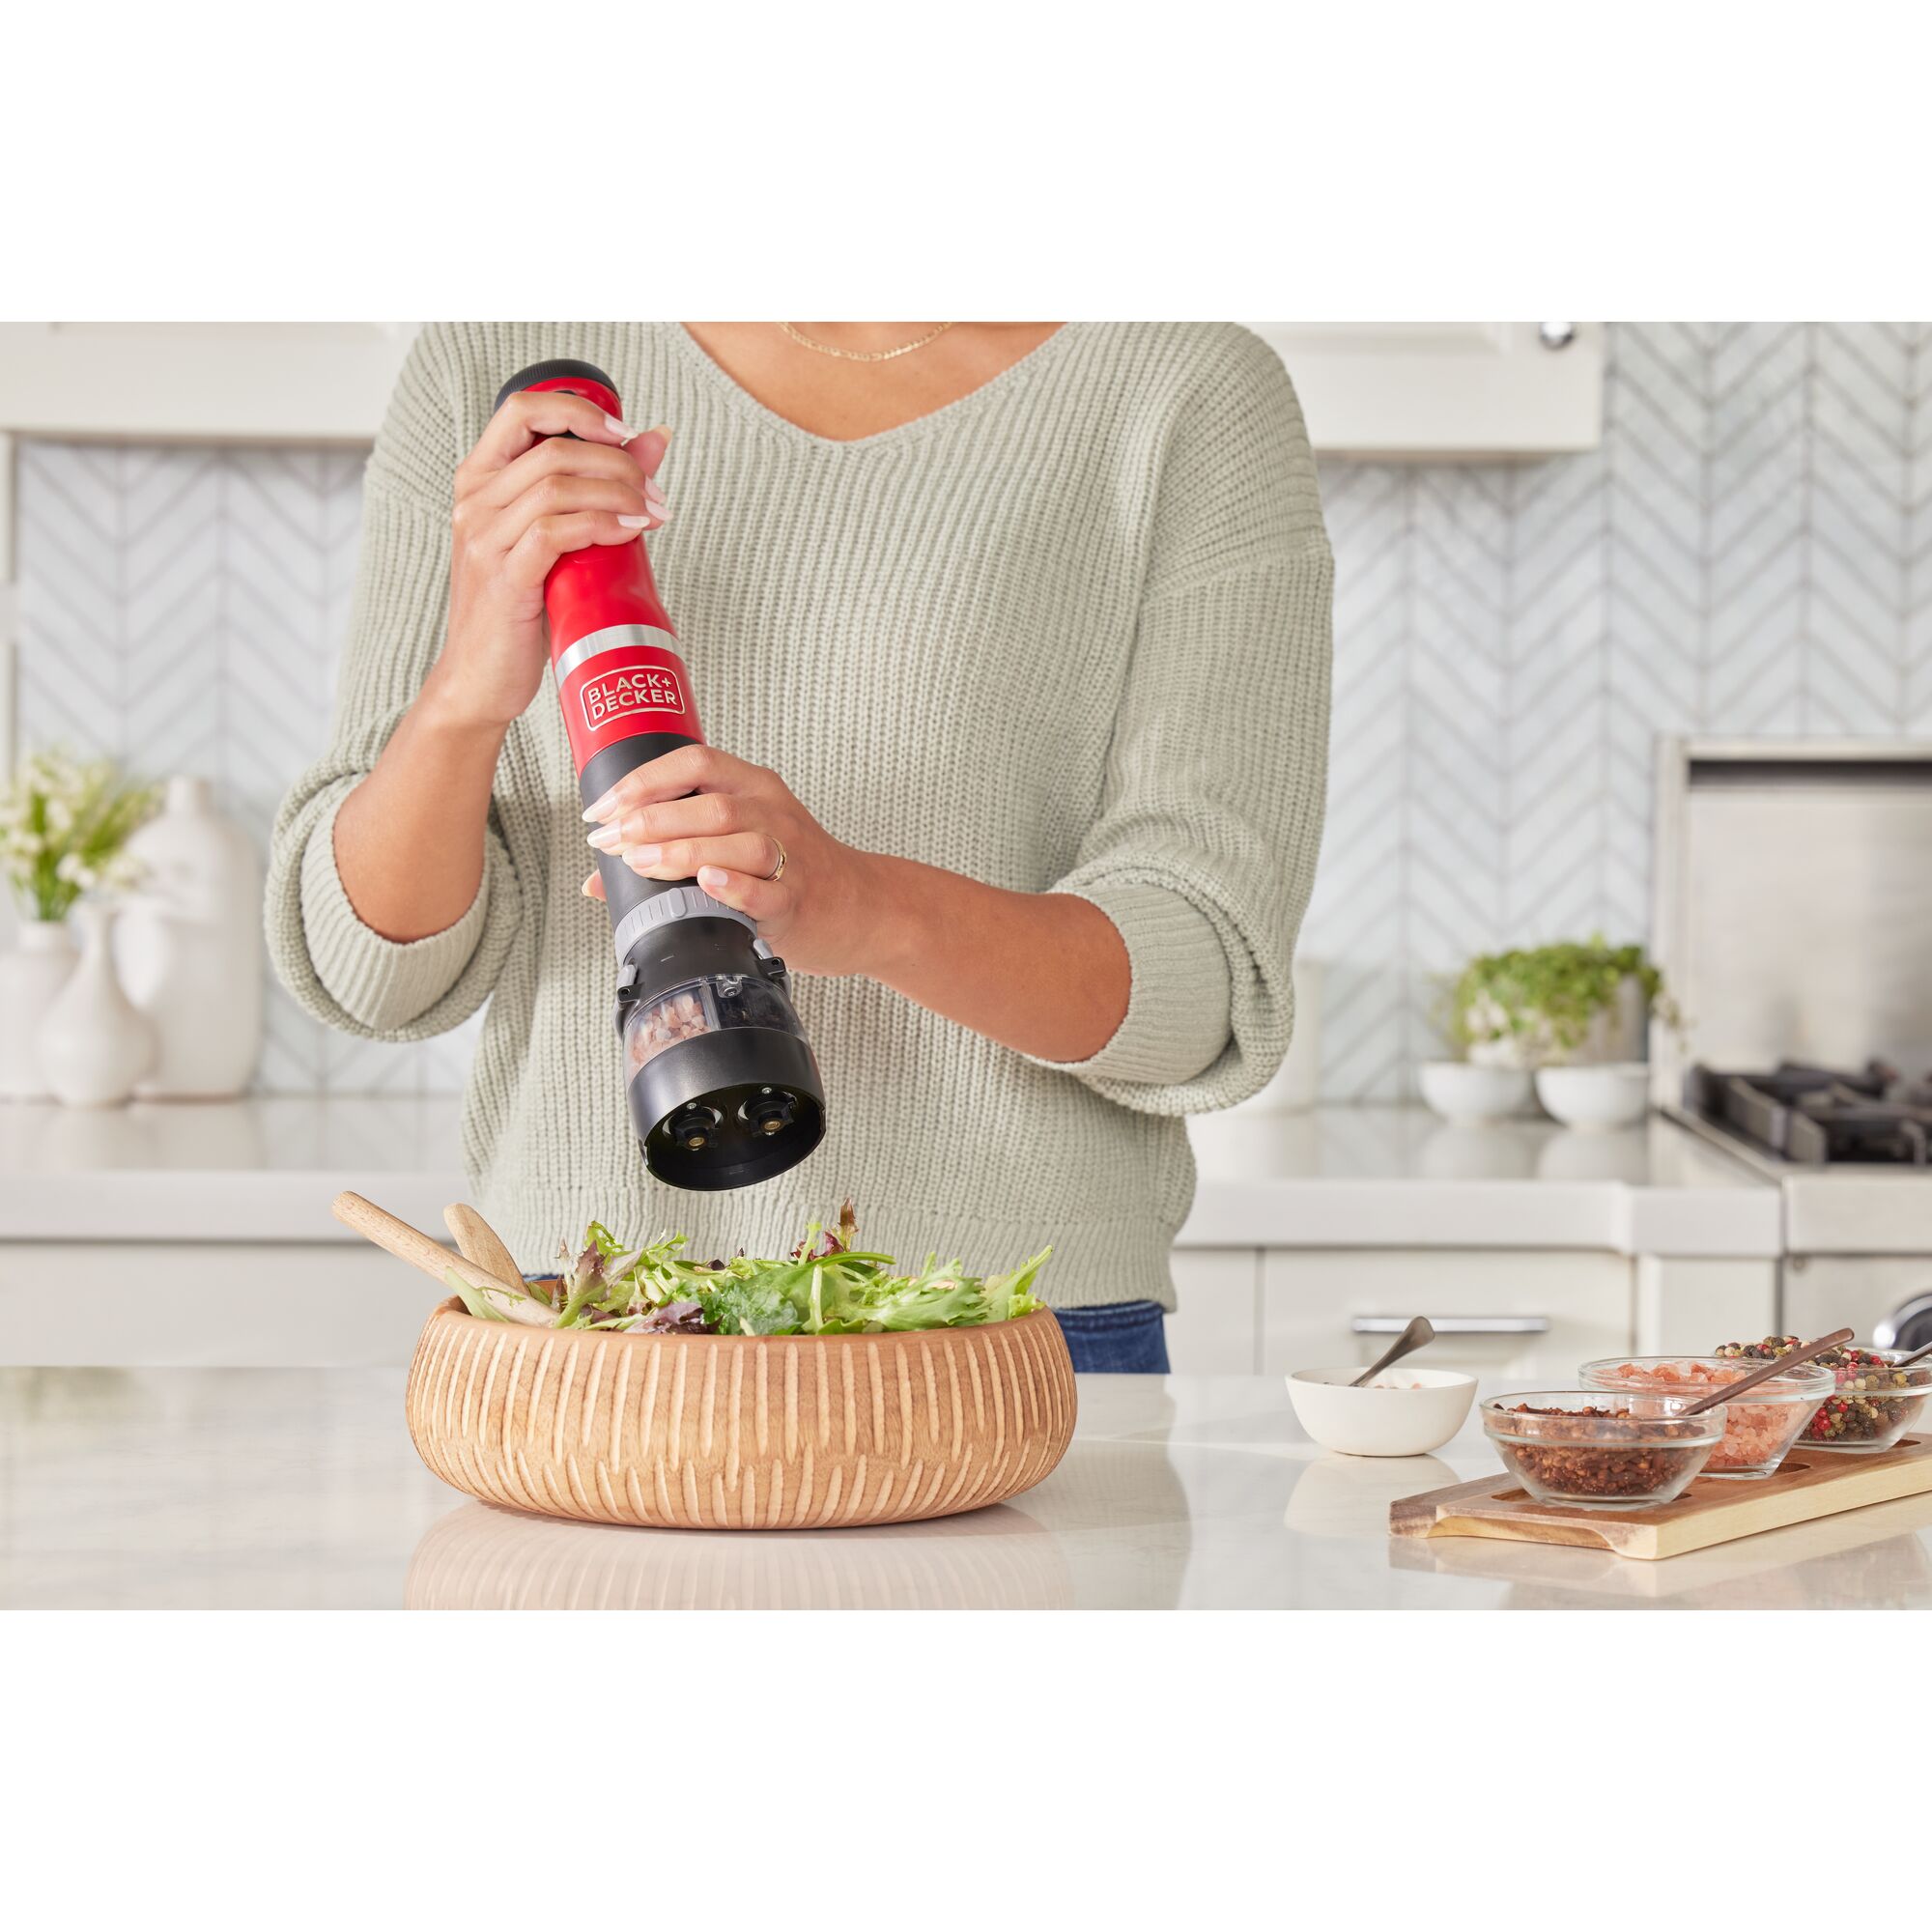 Talent using the red BLACK+DECKER kitchen wand spice grinder attachment to add spices to a salad